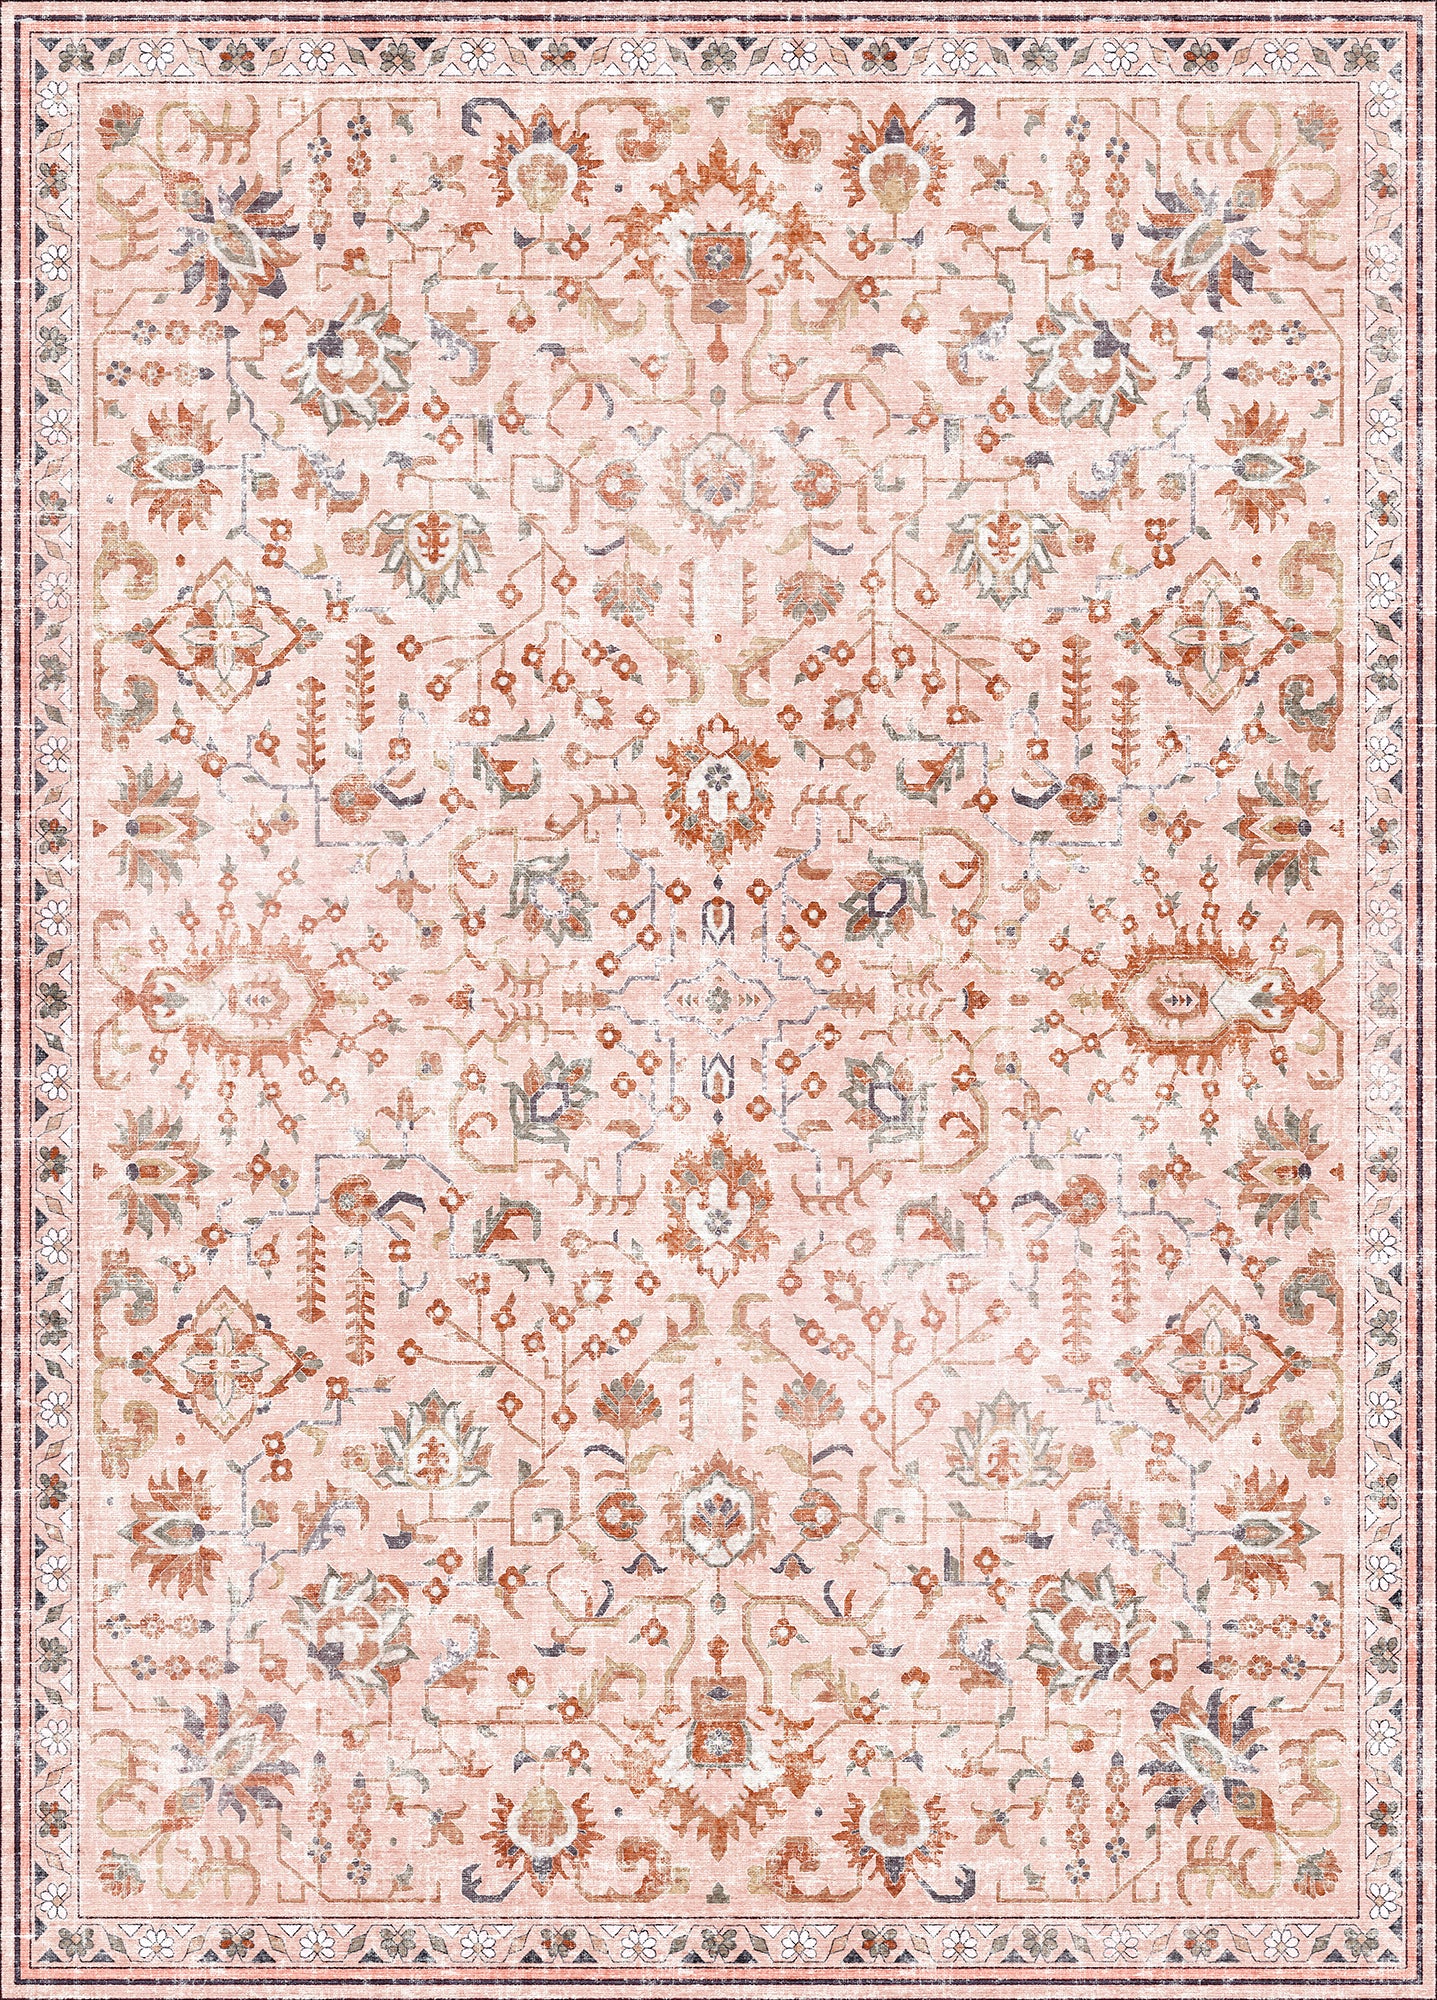 Comicomi 5x7 rug in the living room parvin pink